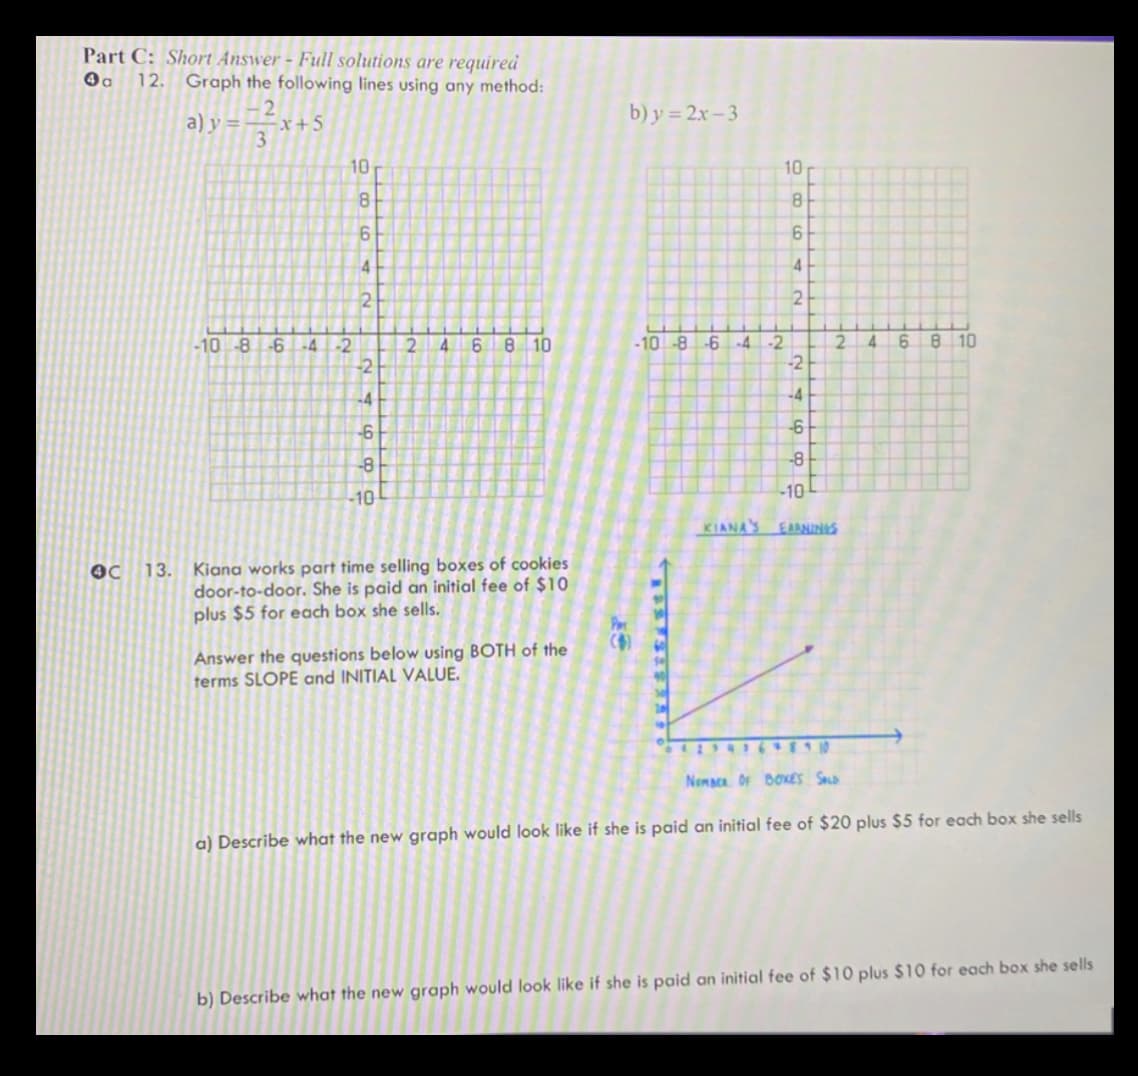 Part C: Short Answer - Full solutions are required
4a 12. Graph the following lines using any method:
a) y=-
2
3
-x+5
-10 -8-6 -4-2
6 8 10
-2
-4
-6
-8
-10
-10
KIANA'S EARNINGS
Kiana works part time selling boxes of cookies
door-to-door. She is paid an initial fee of $10
plus $5 for each box she sells.
Answer the questions below using BOTH of the
terms SLOPE and INITIAL VALUE.
NEMBER OF BOXES SALD
a) Describe what the new graph would look like if she is paid an initial fee of $20 plus $5 for each box she sells
b) Describe what the new graph would look like if she is paid an initial fee of $10 plus $10 for each box she sells
OC 13.
980
10
6
4
2
-2
-4
-6
-8
9
2 4
b) y=2x-3
-10 -8 -6 -4 -2
10
8
6
4
2
2
4
6 8 10